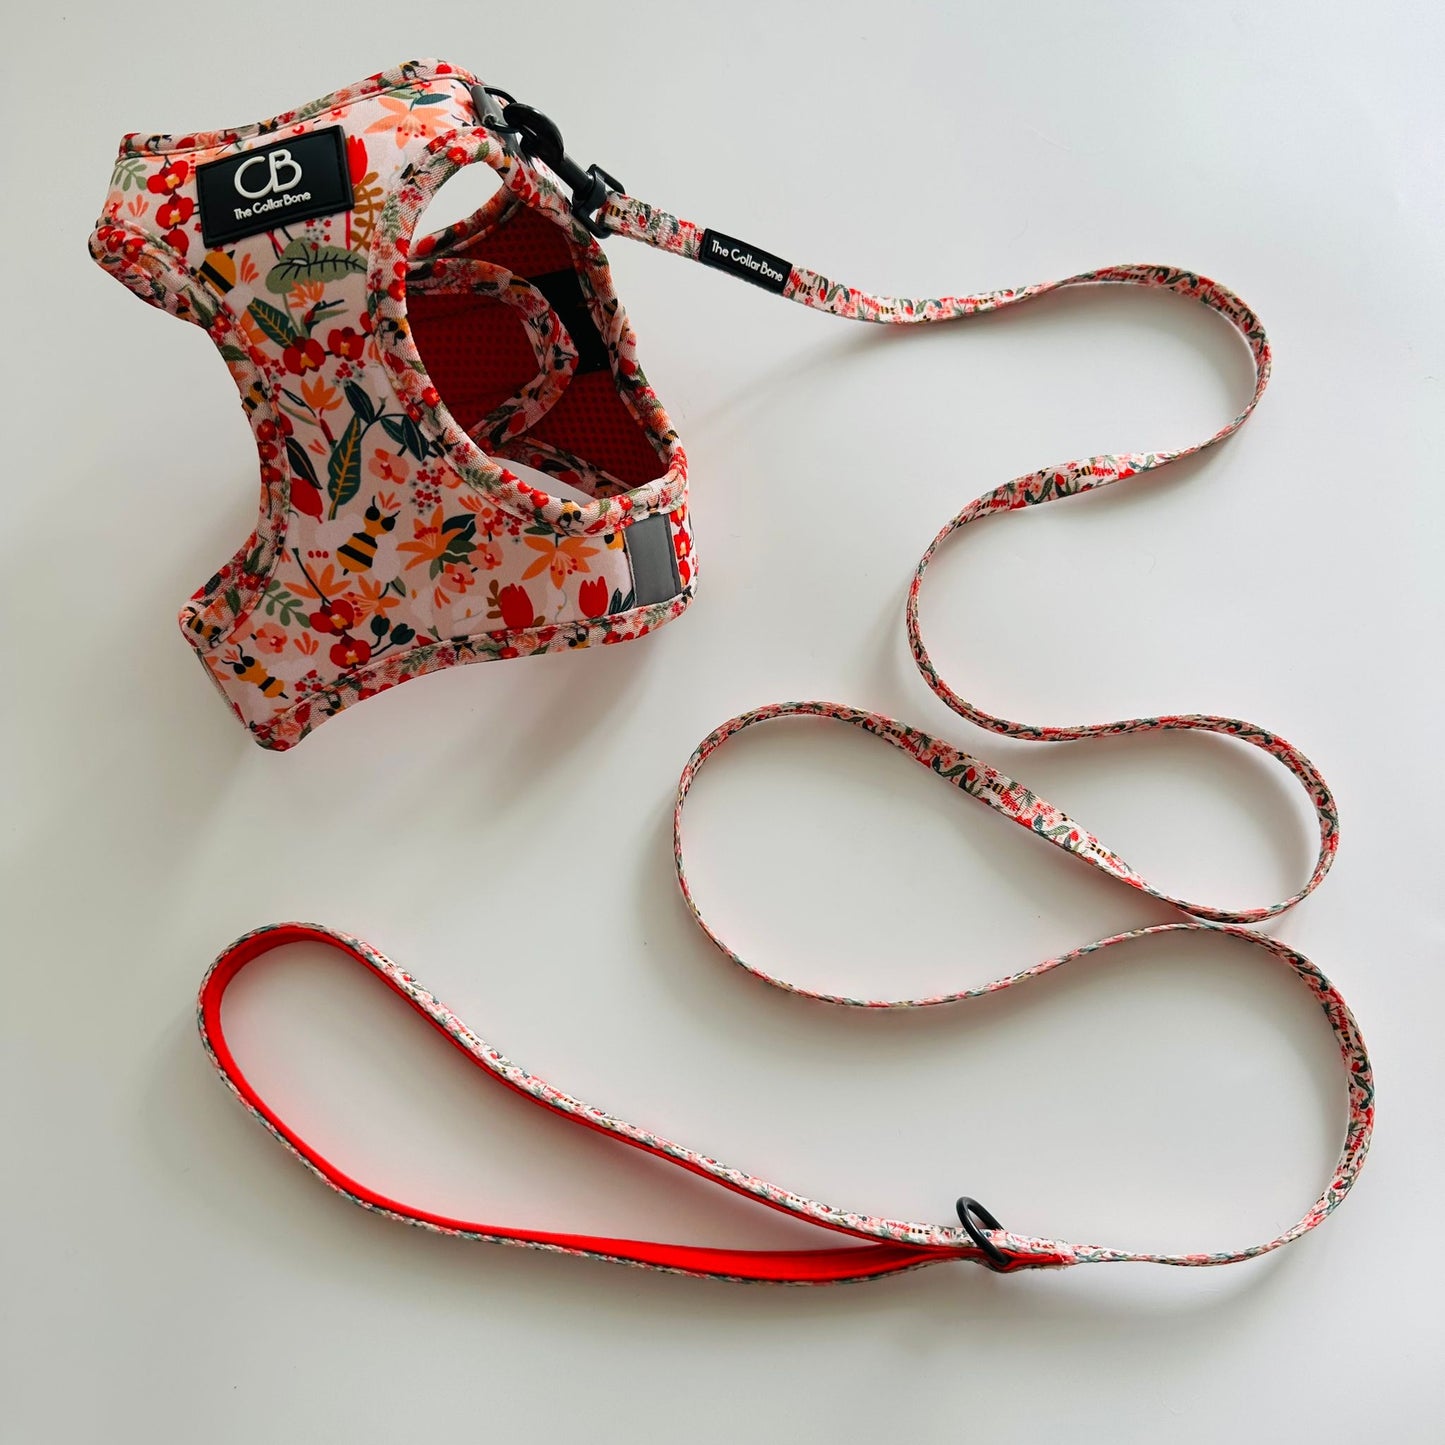 Teeny back-to-basic Leash in Busy Bee